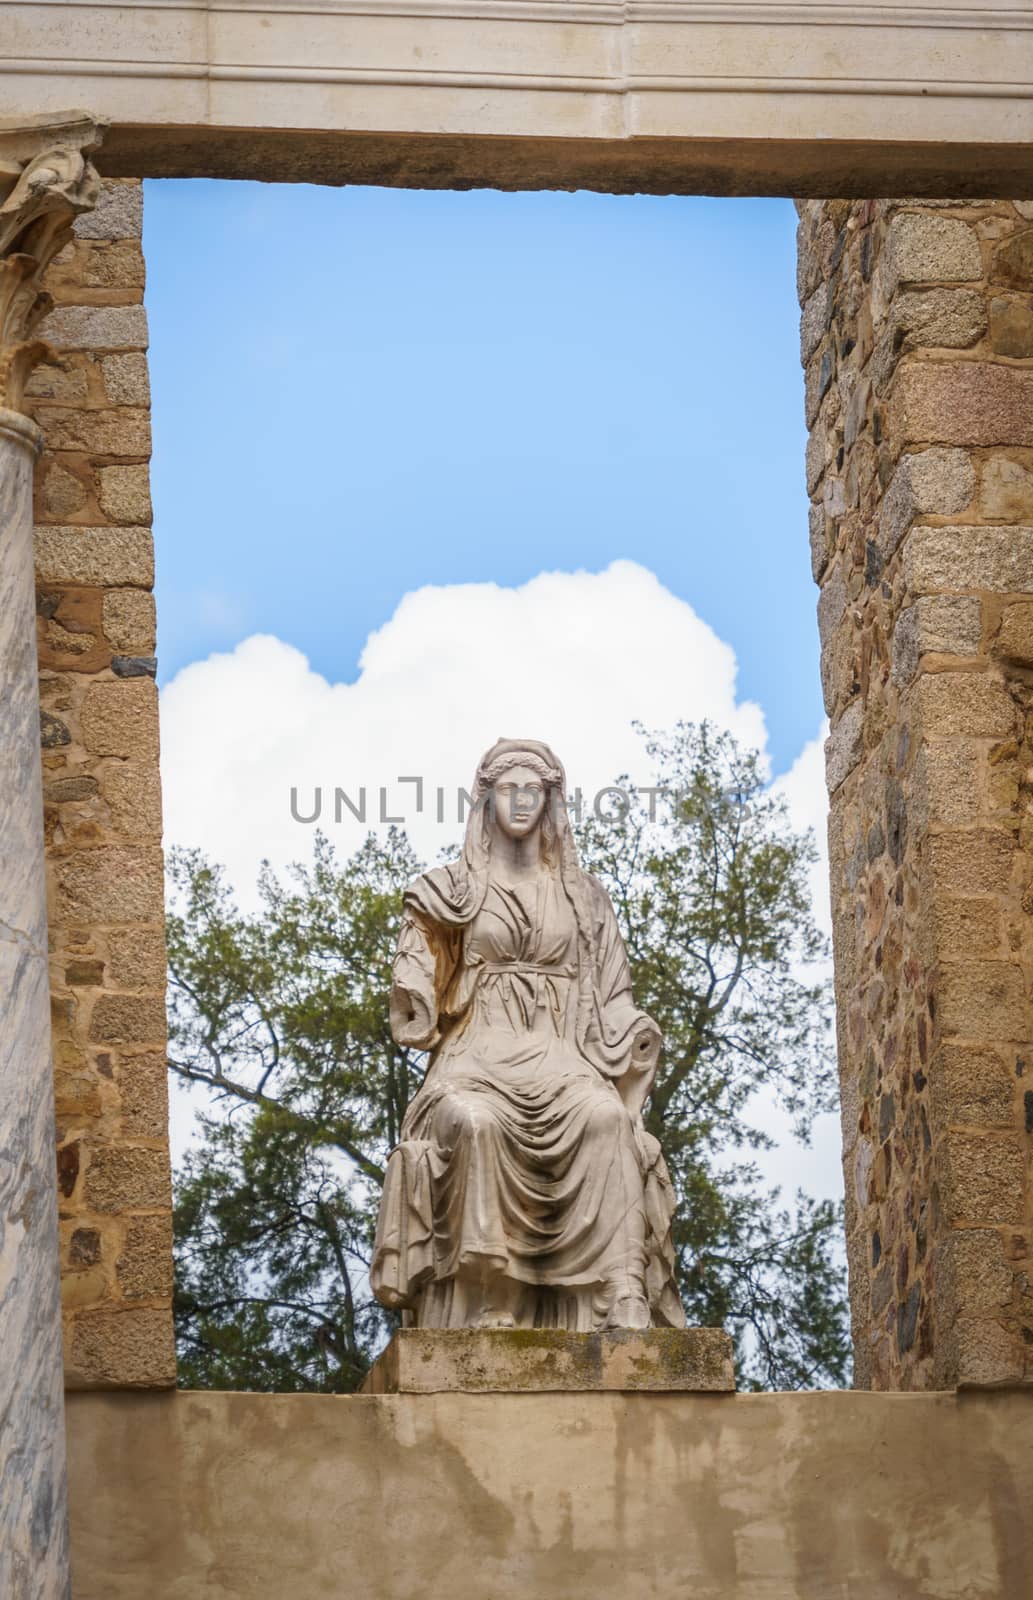 Statue of the goddess Ceres at the Roman Theatre in Merida, Spain by tanaonte